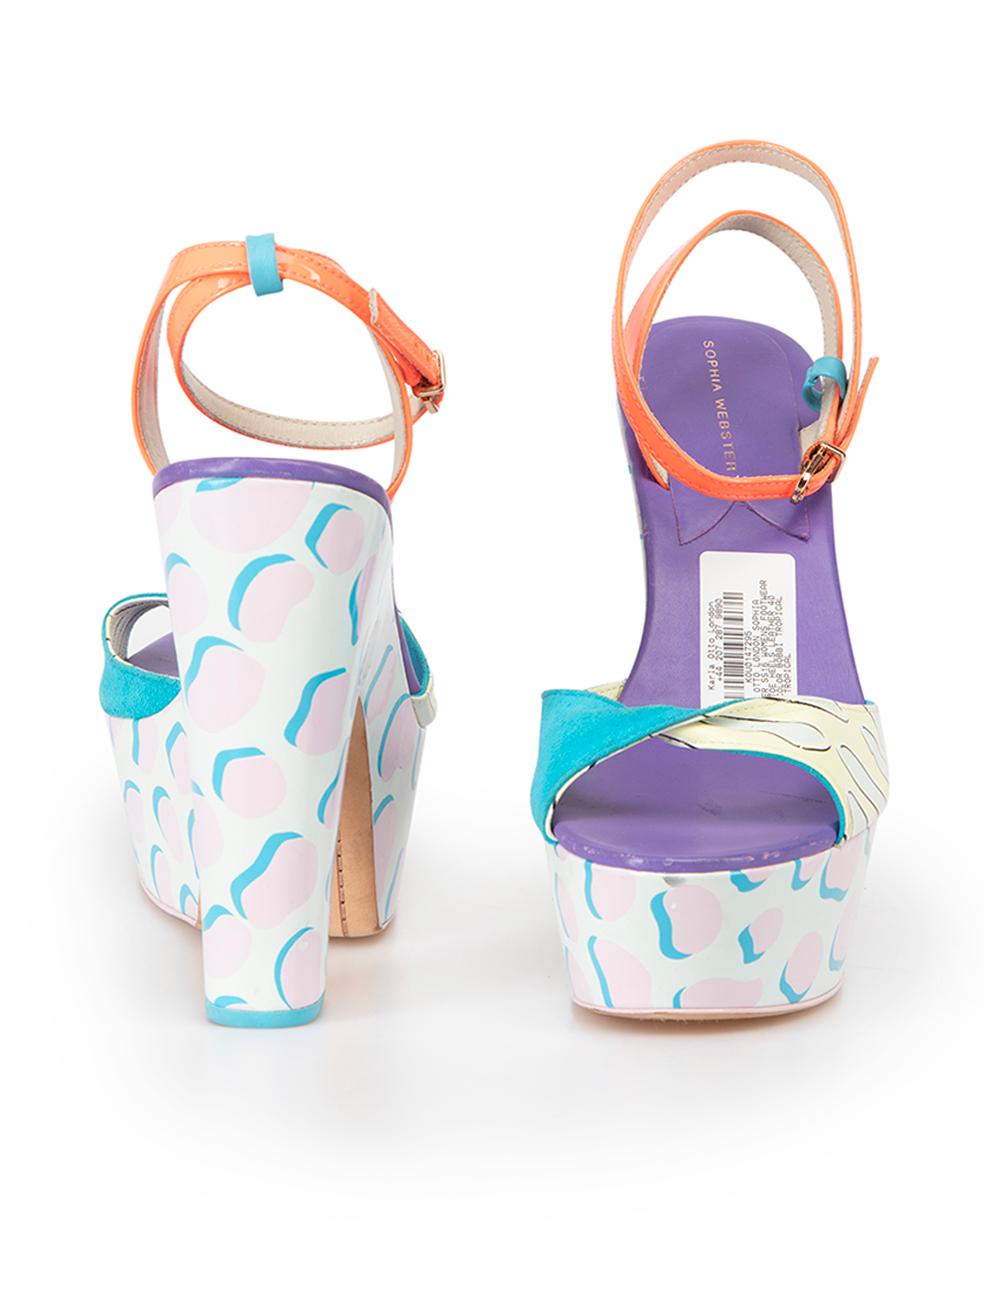 Sophia Webster Women's Pastel Colour Leather Bobbi Tropical Platform Sandals In Good Condition For Sale In London, GB